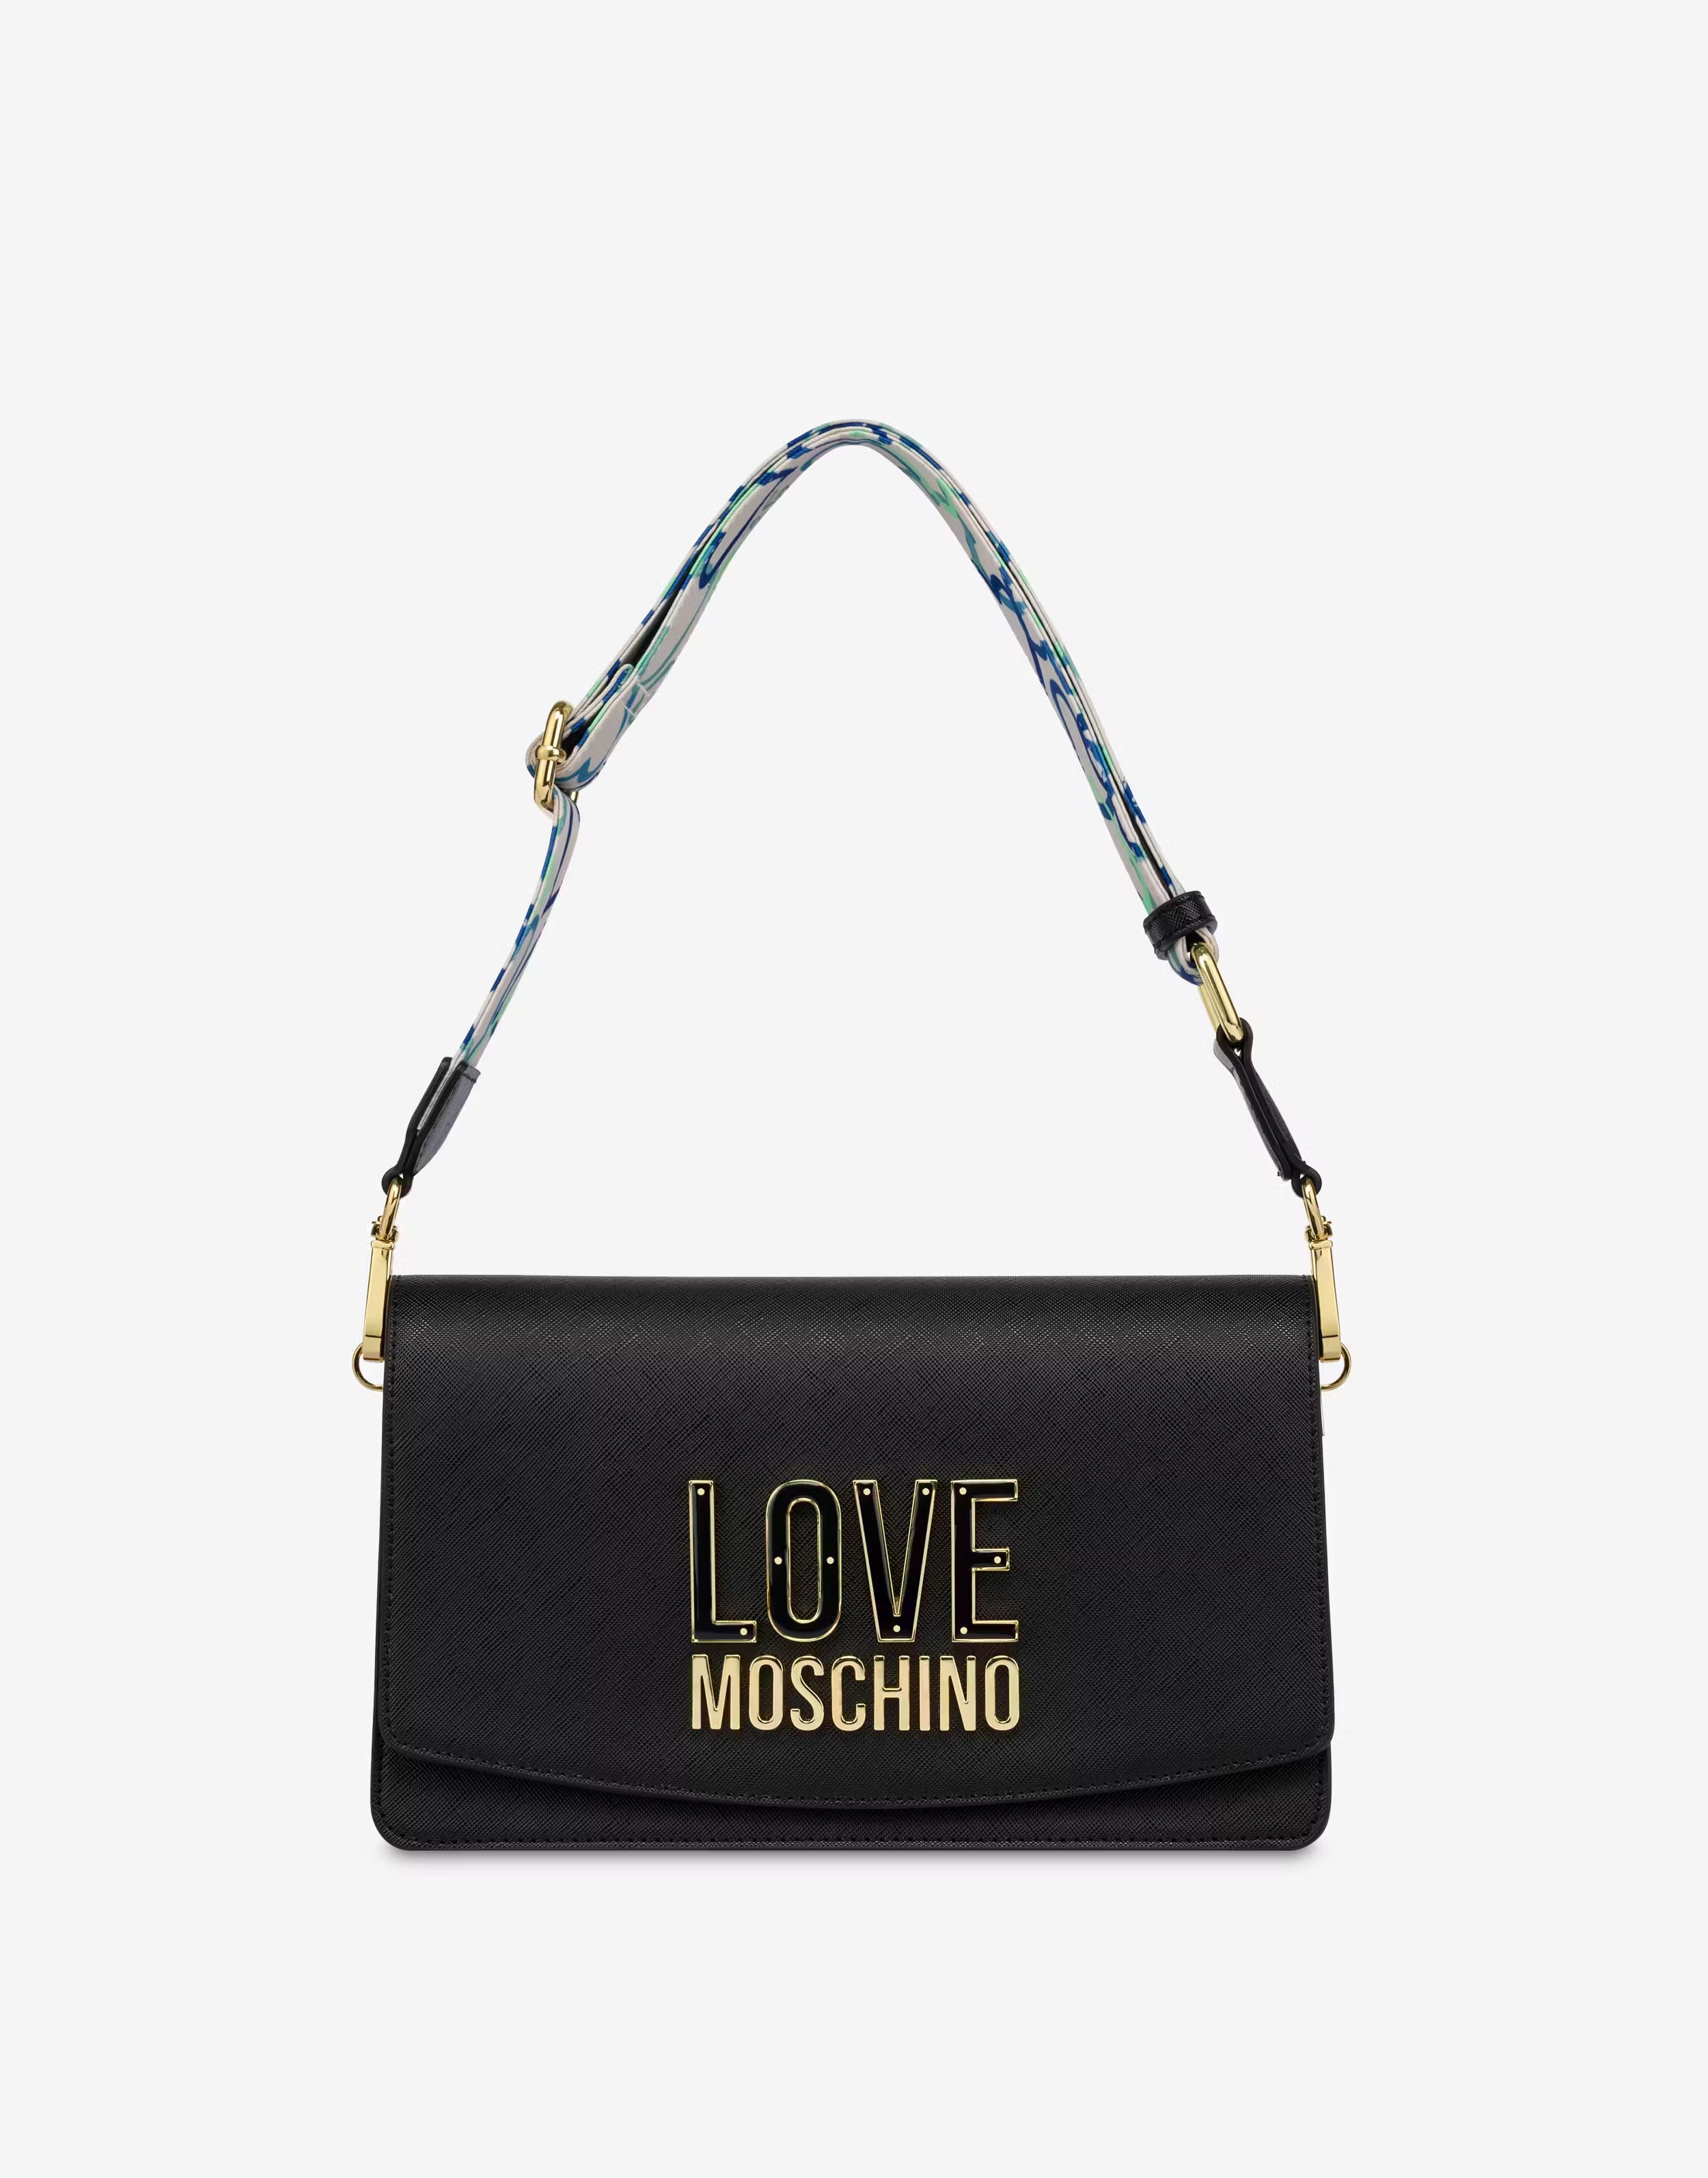 Moschino Official Store the United States | Moschino